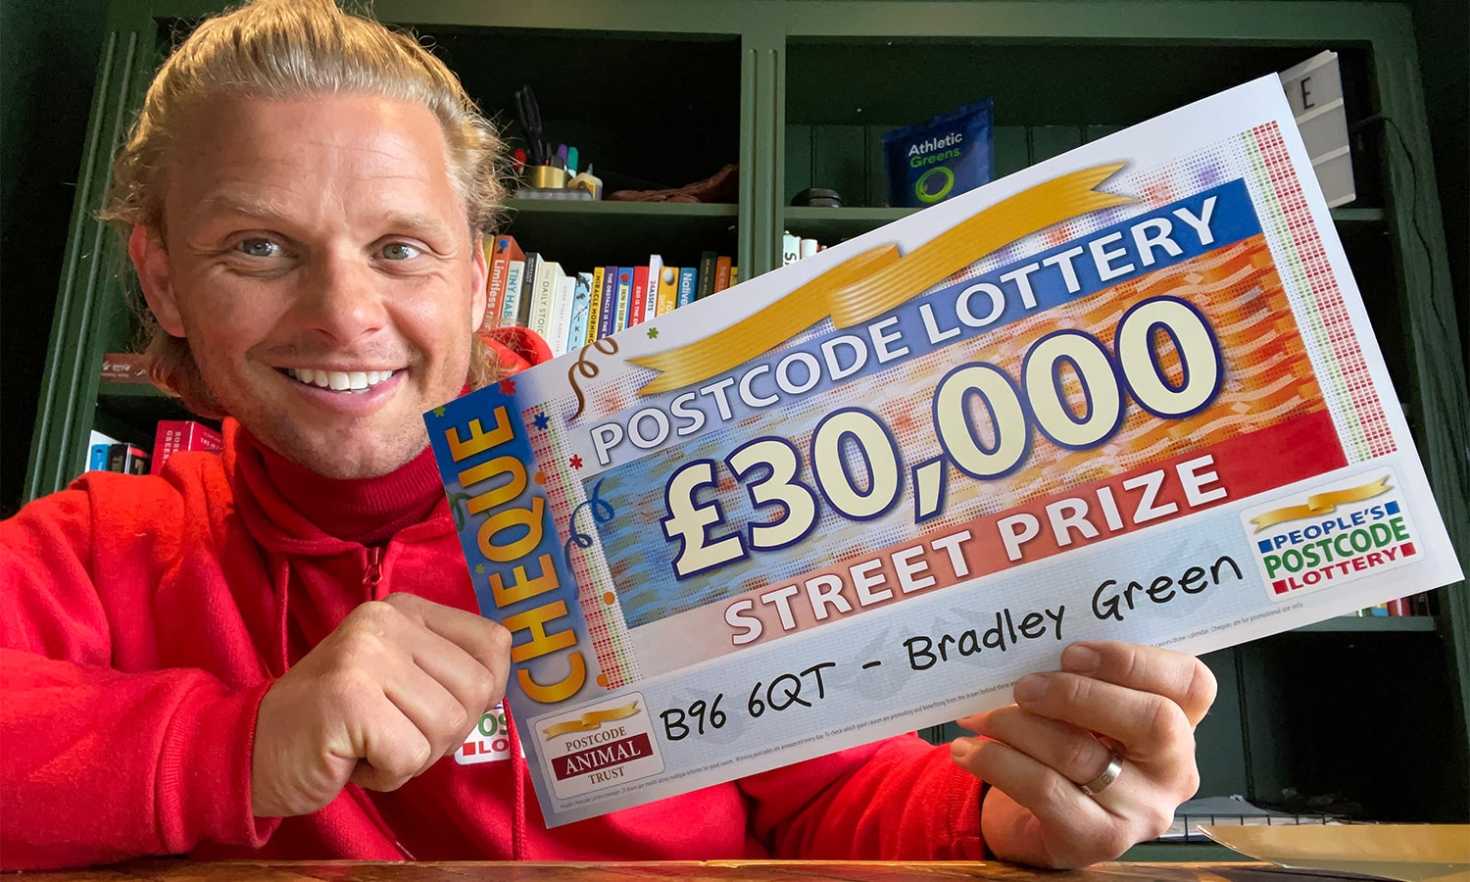 Jeff has £30,000 Street Prize cheques for two lucky winners in Bradley Green